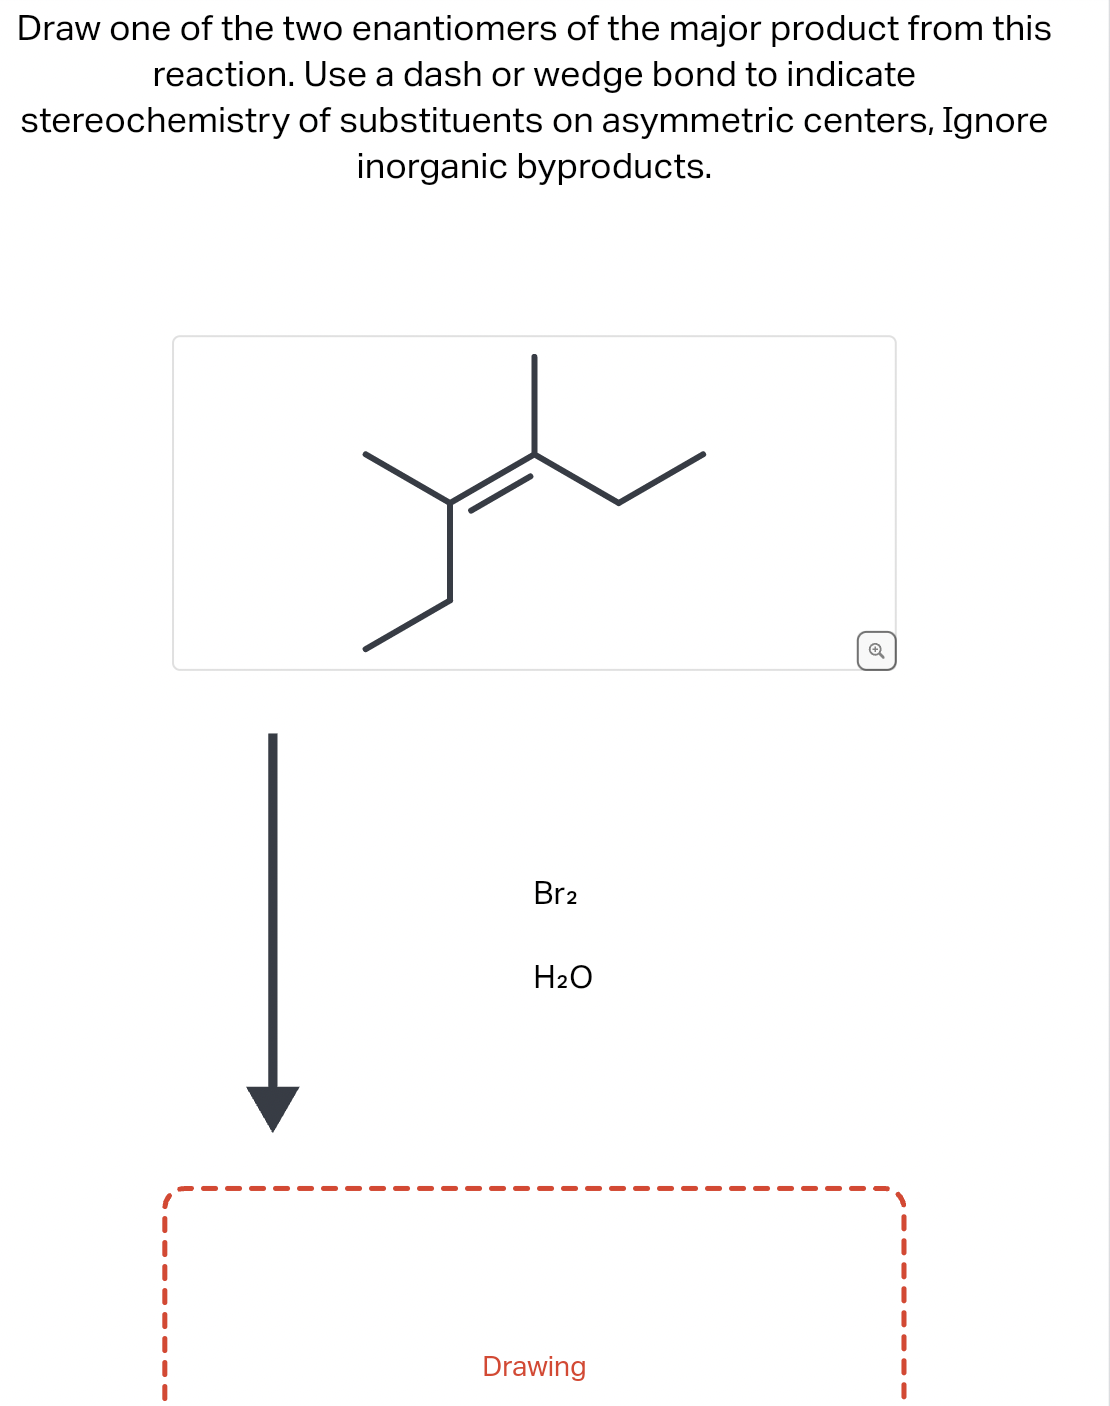 Draw one of the two enantiomers of the major product from this
reaction. Use a dash or wedge bond to indicate
stereochemistry
of substituents on asymmetric centers, Ignore
inorganic byproducts.
Br2
H₂O
Drawing
Q